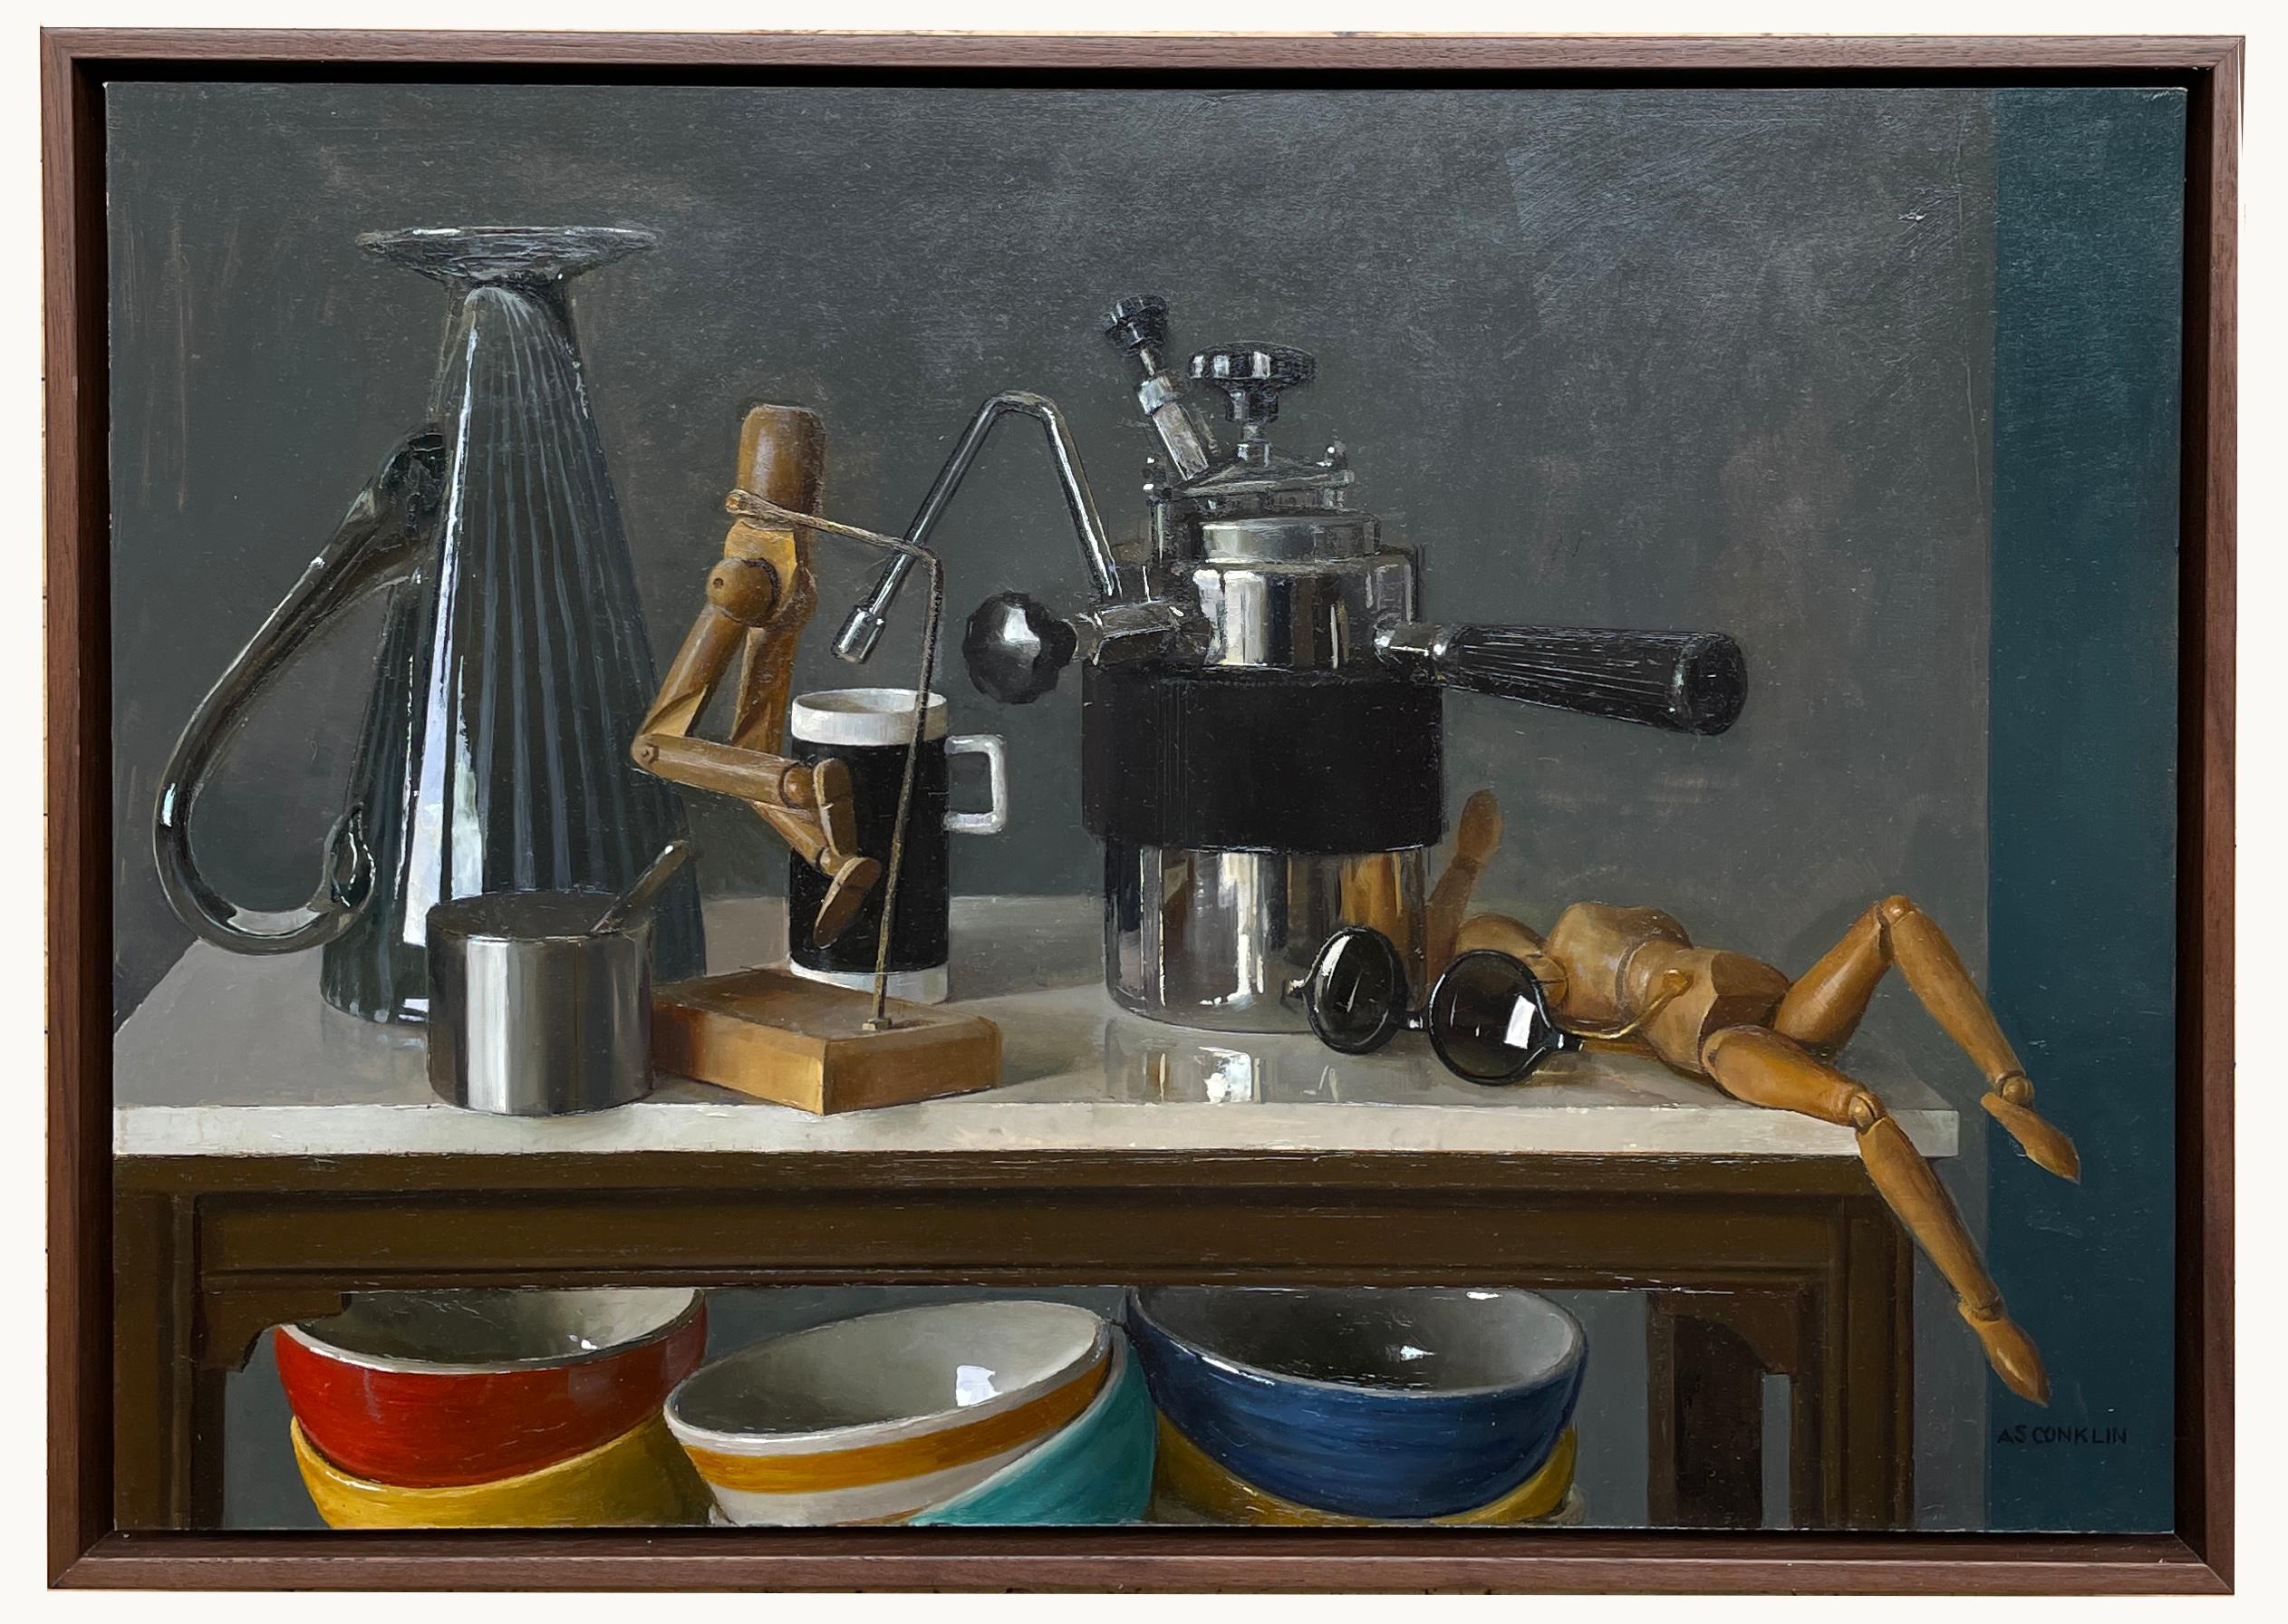 This still life painting on panel captures a variety of objects. Among the objects depicted are a elaborate Italian espresso maker, an upturned venetian glass pitcher, two wooden models and several colorful ceramic bowls. These masterfully painted